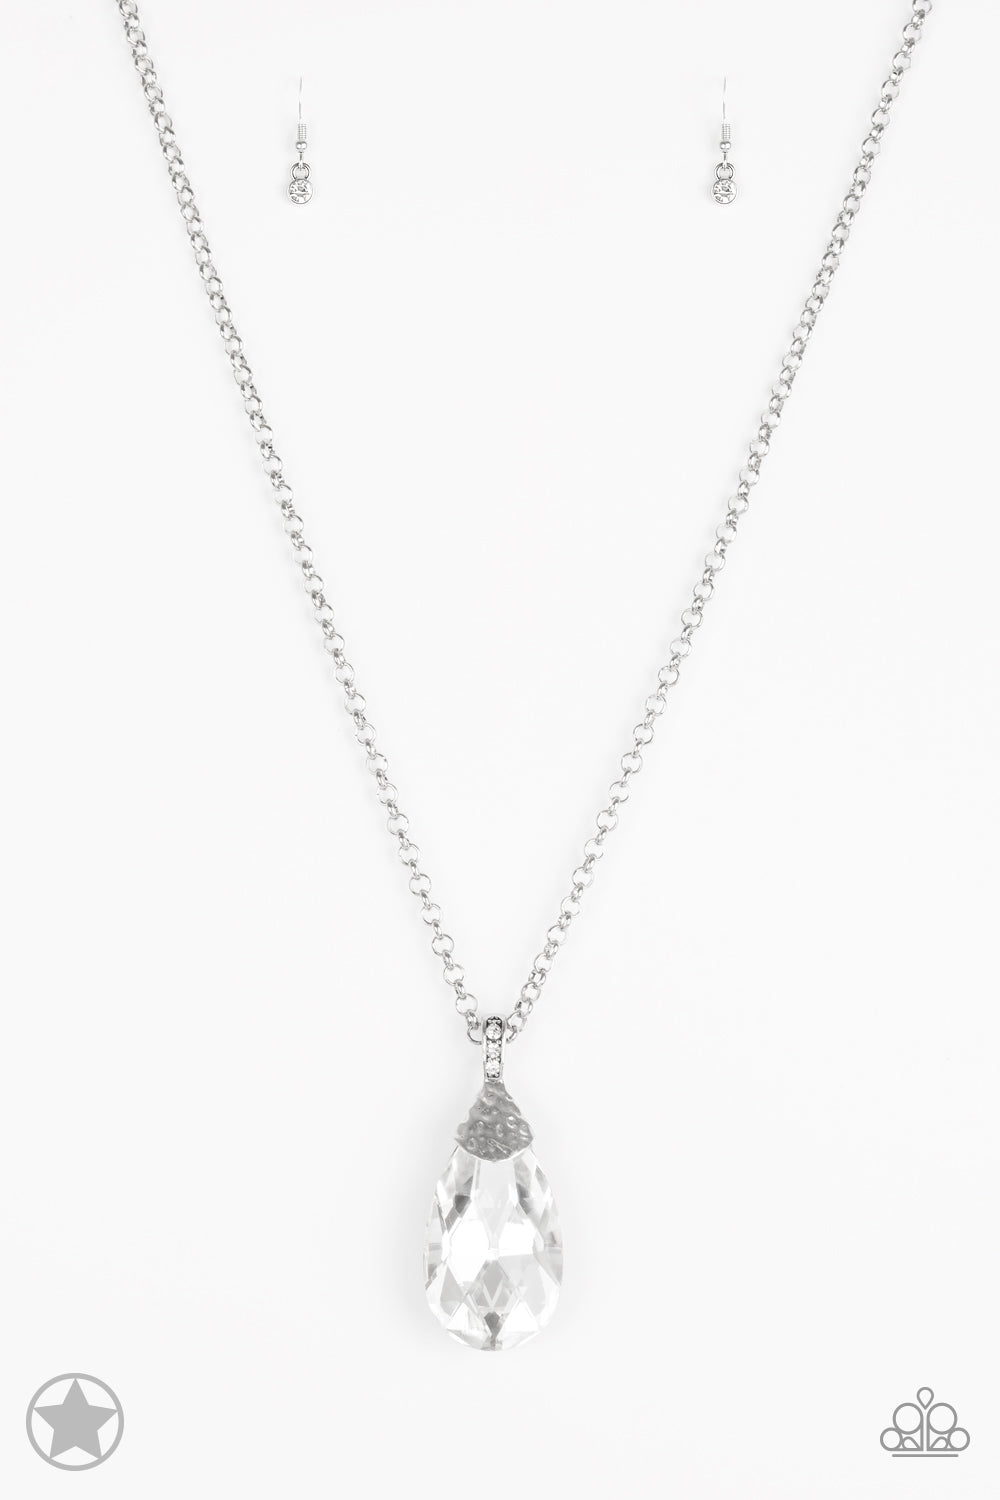 Paparazzi Accessories Spellbinding Sparkle Blockbuster Necklace - Be Adored Jewelry